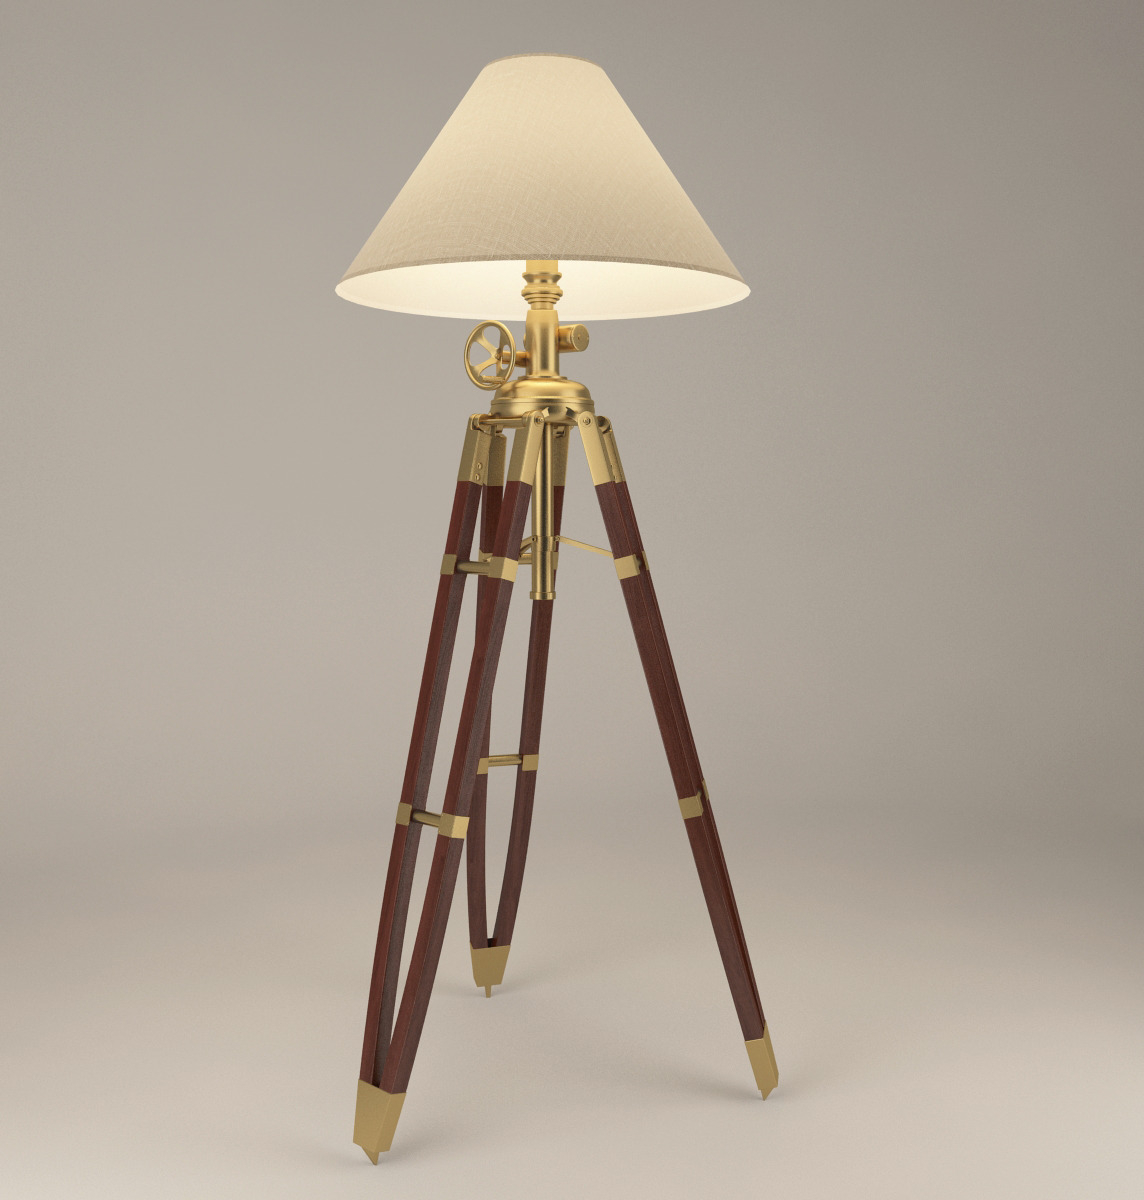 Royal Marine Tripod Lamp With Materials Textures pertaining to dimensions 1144 X 1200